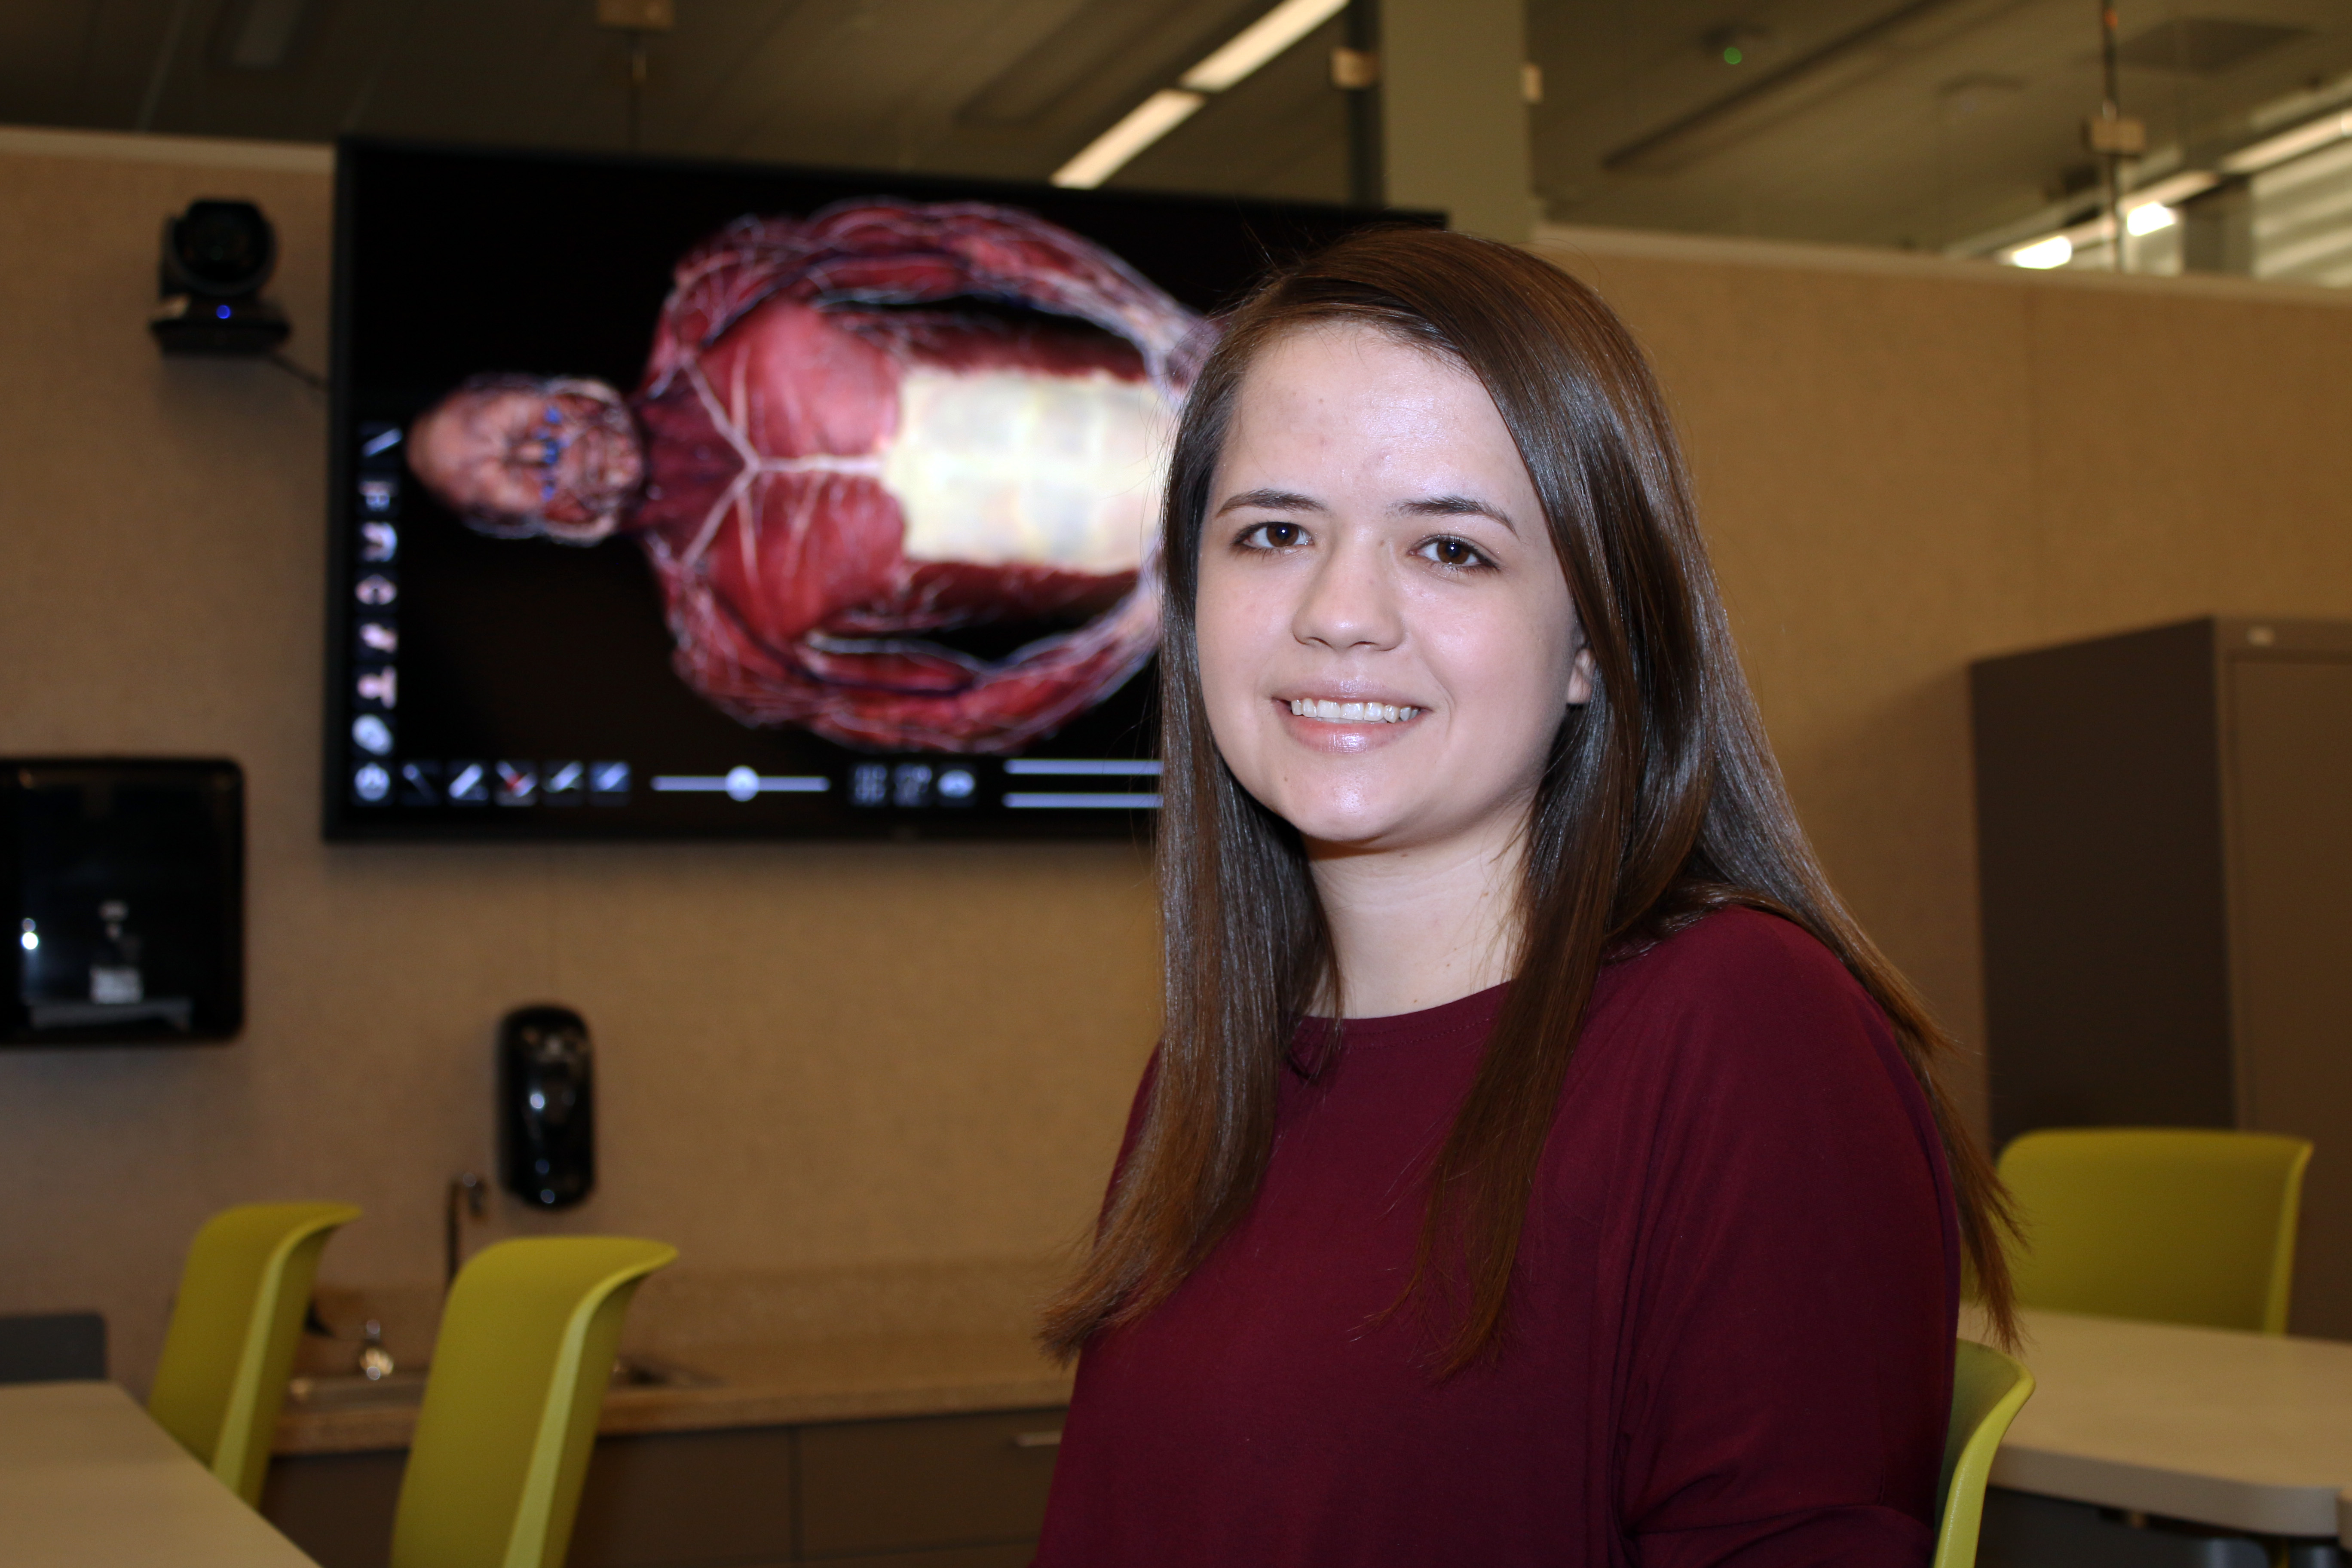  Kinesiology major, Amber Truhitt of Union, takes a break in the Mississippi Power Anatomy Lab in the Rosenbaum Building on MSU-Meridian’s Riley Campus.